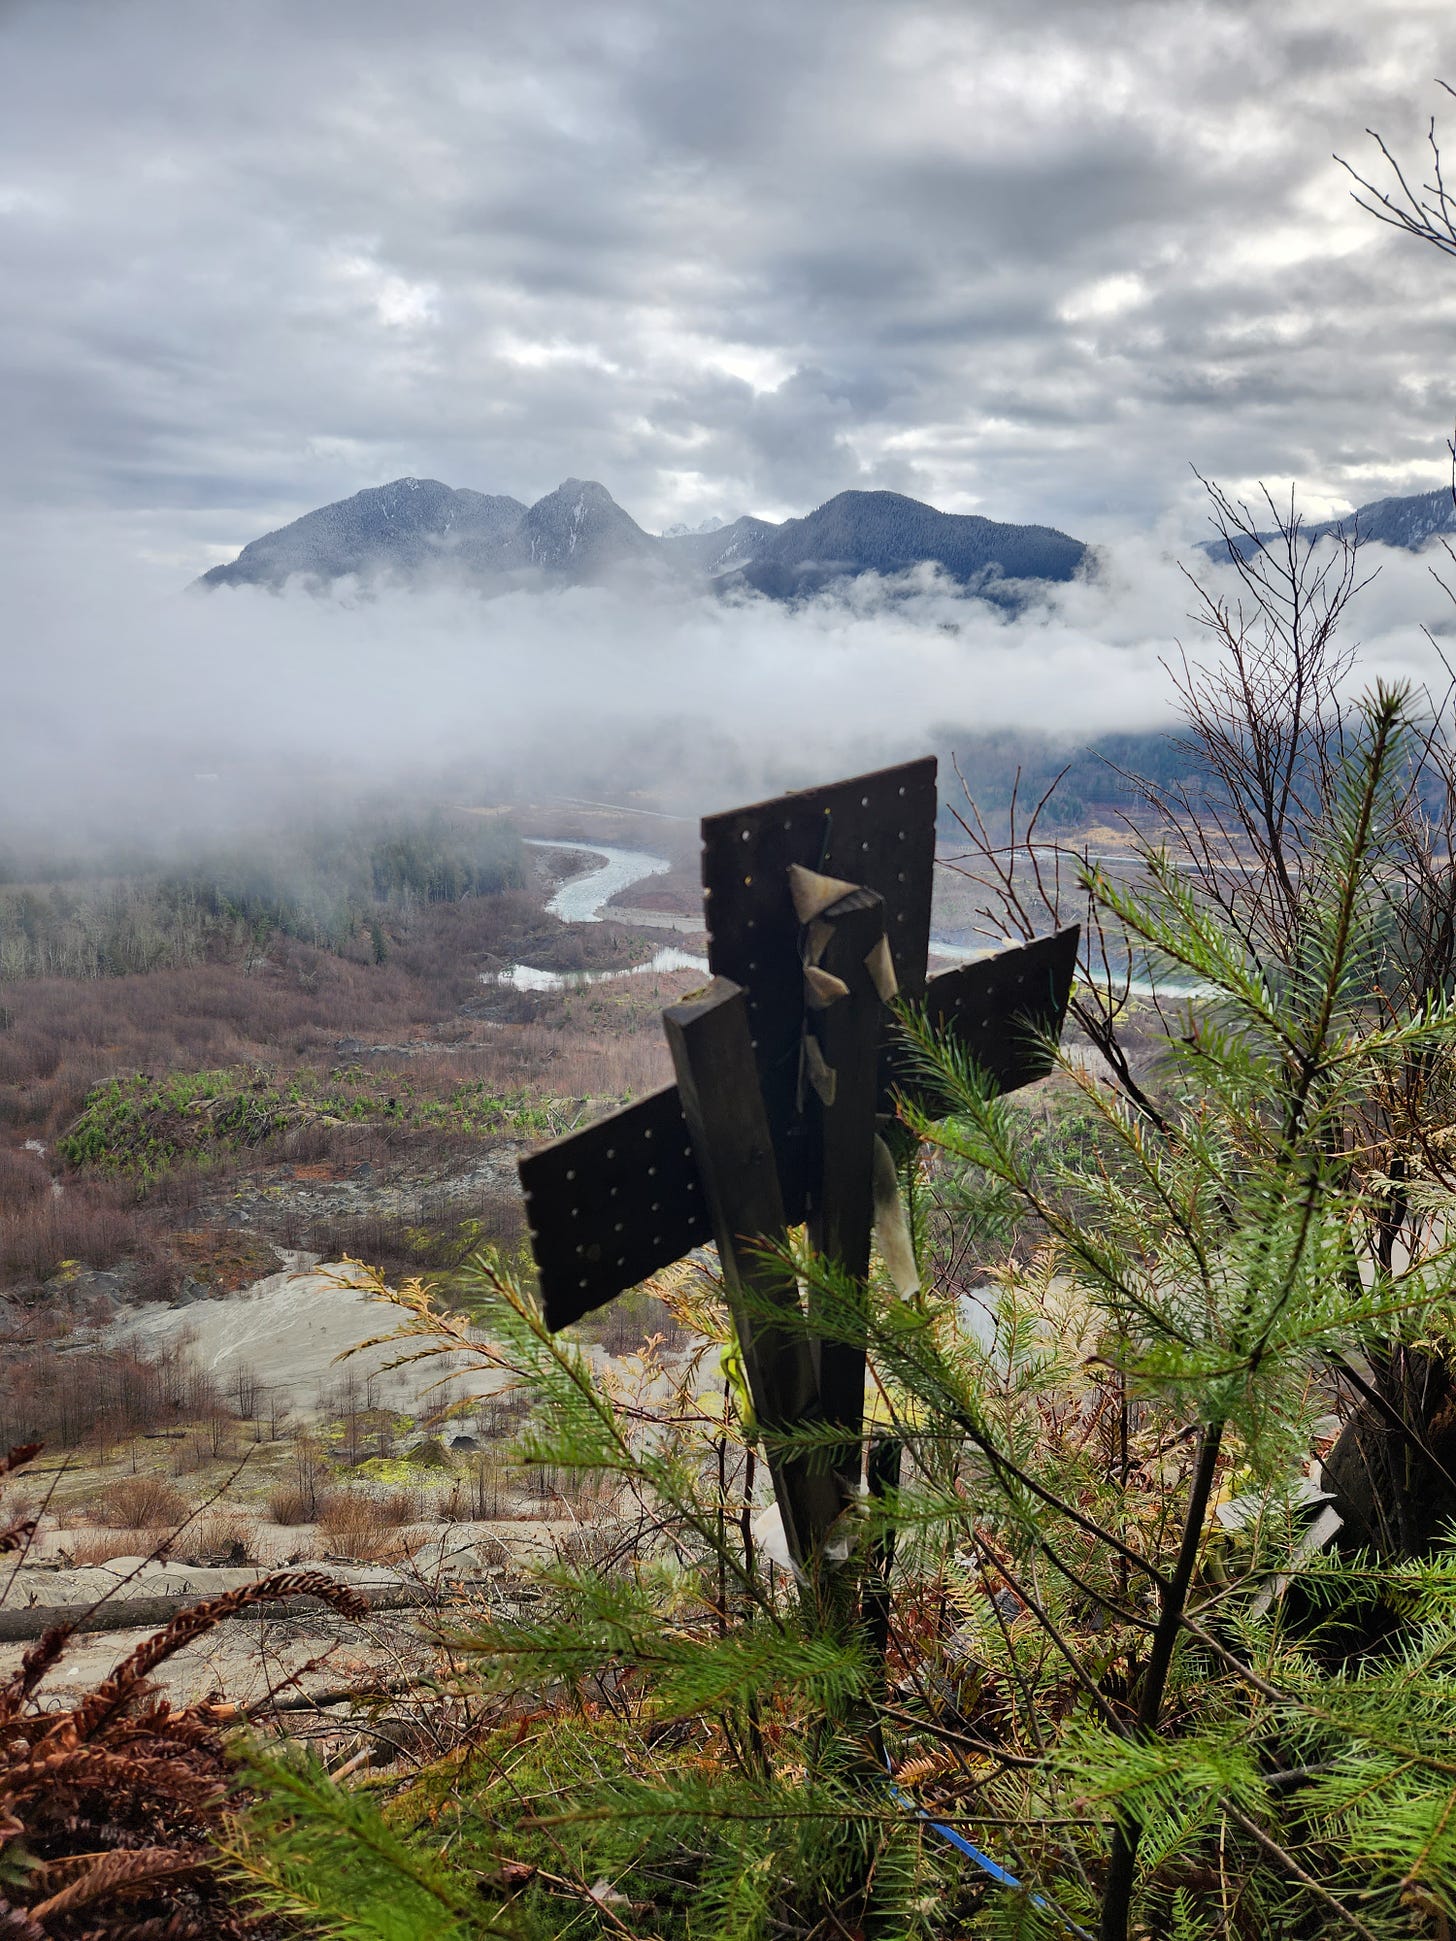 handmade cross on a dropoff before a river valley and mountain backdrop with clouds